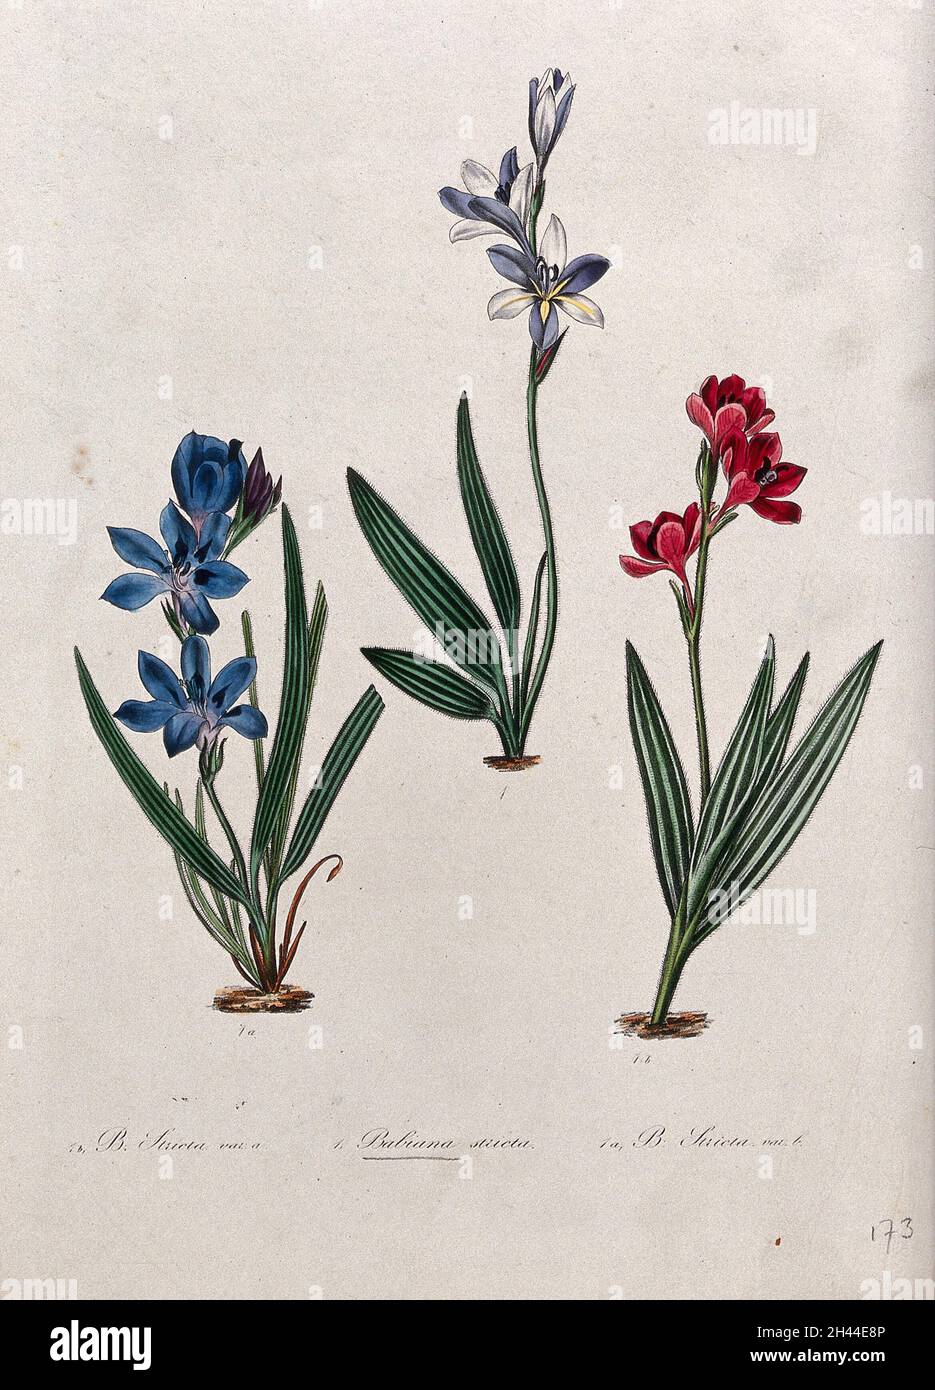 Three flowering plants, all varieties of the genus Babiana. Coloured lithograph. Stock Photo